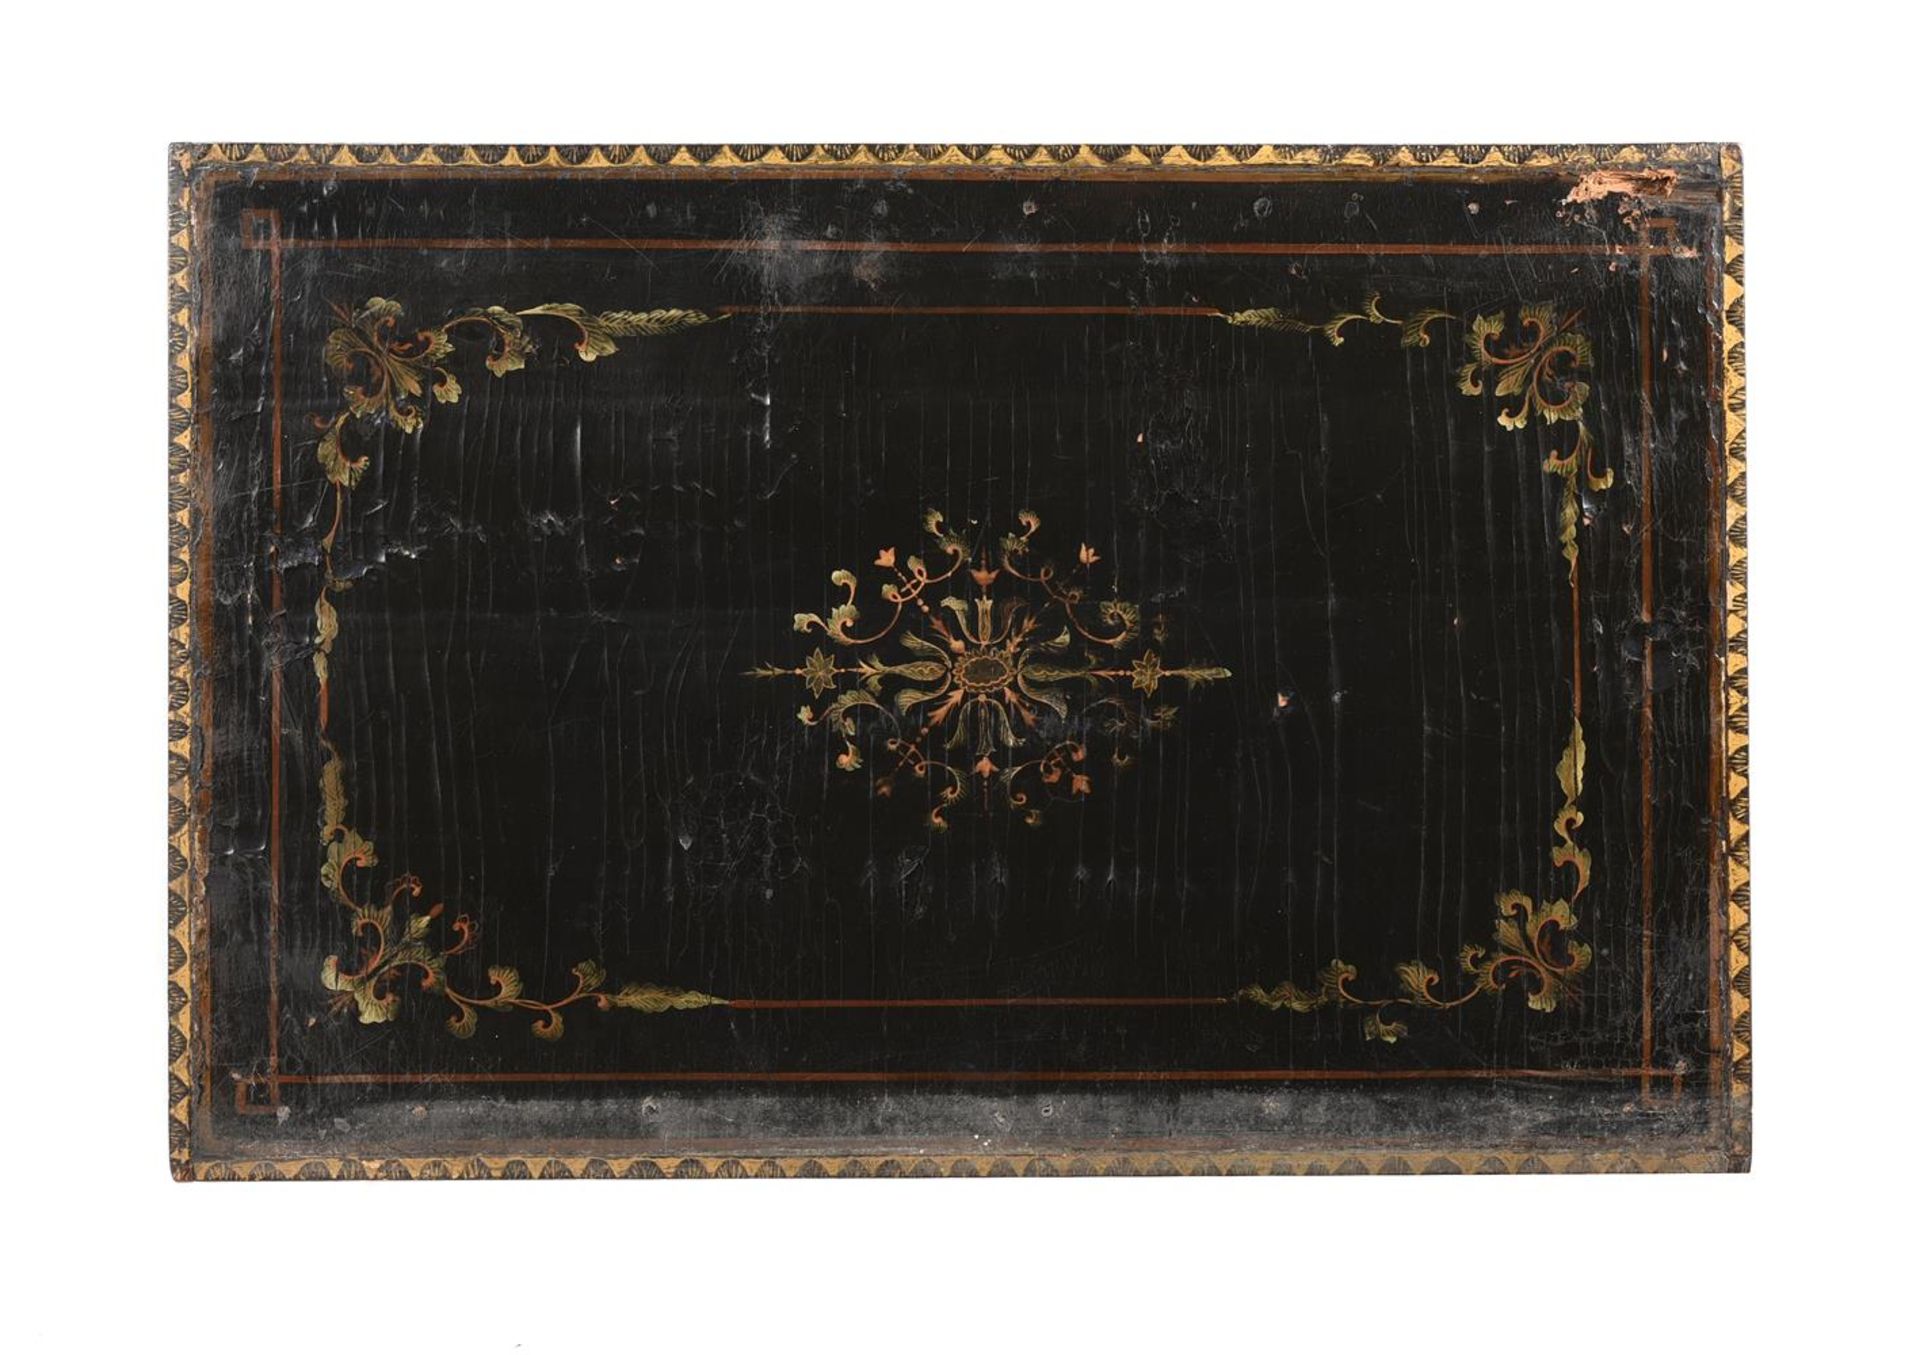 A CHINESE EXPORT LACQUER CABINET ON STAND, LATE 18TH OR EARLY 19TH CENTURY - Bild 15 aus 15